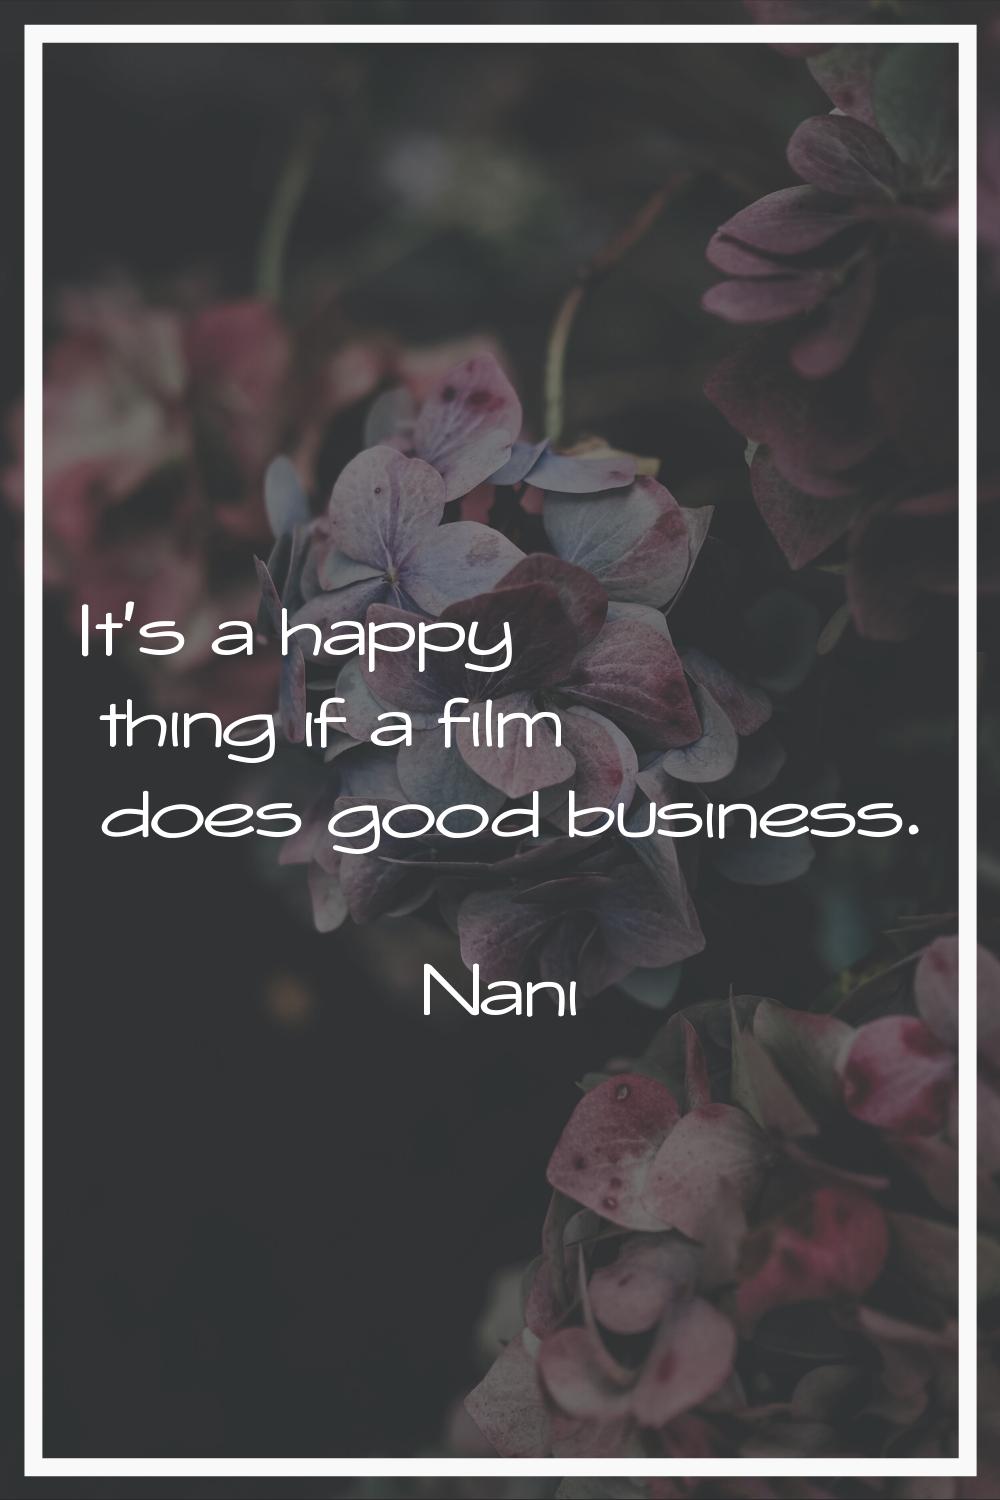 It's a happy thing if a film does good business.